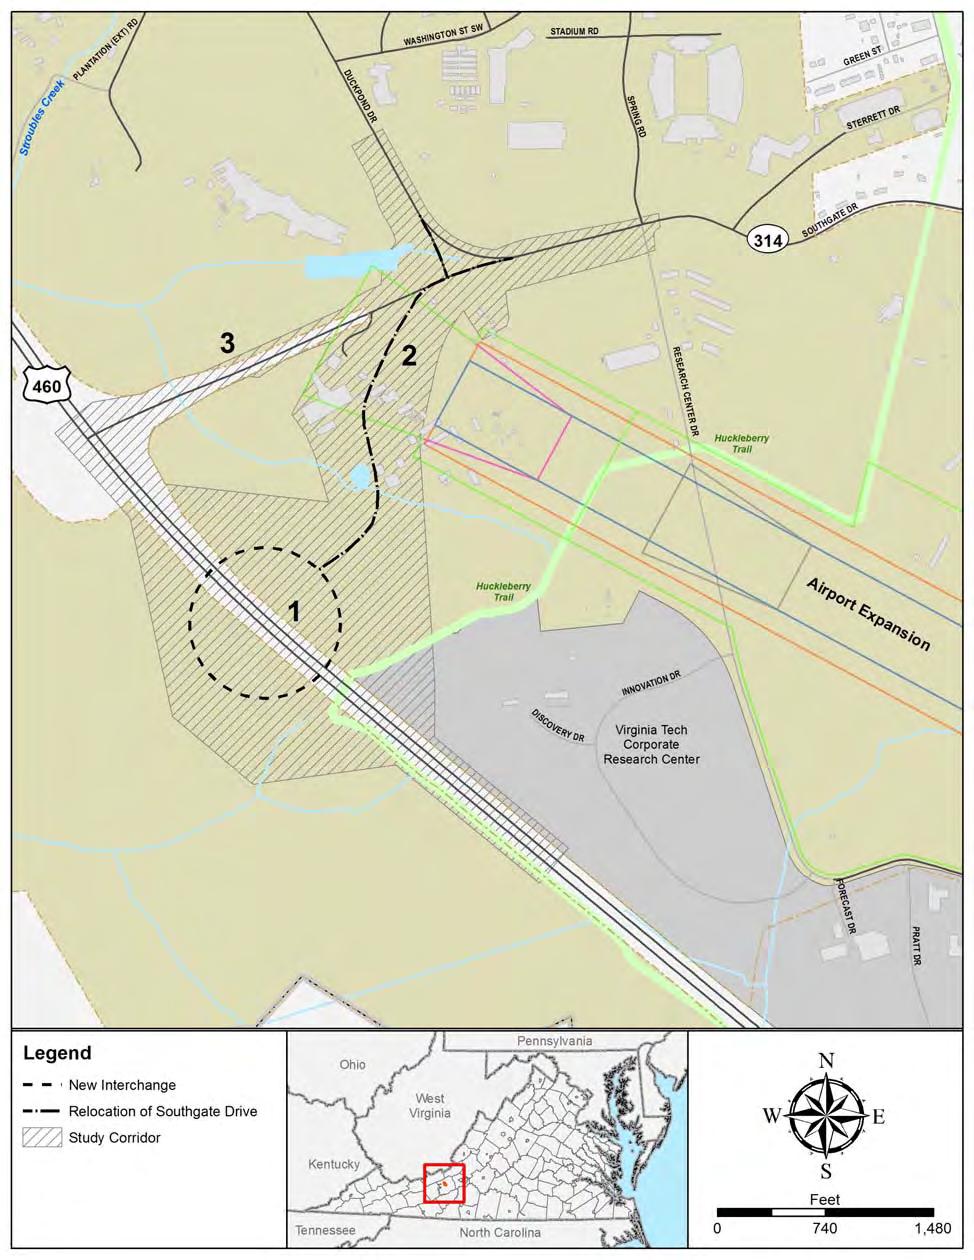 US 460 Bypass Interchange and Southgate Drive Relocation Environmental Assessment Figure